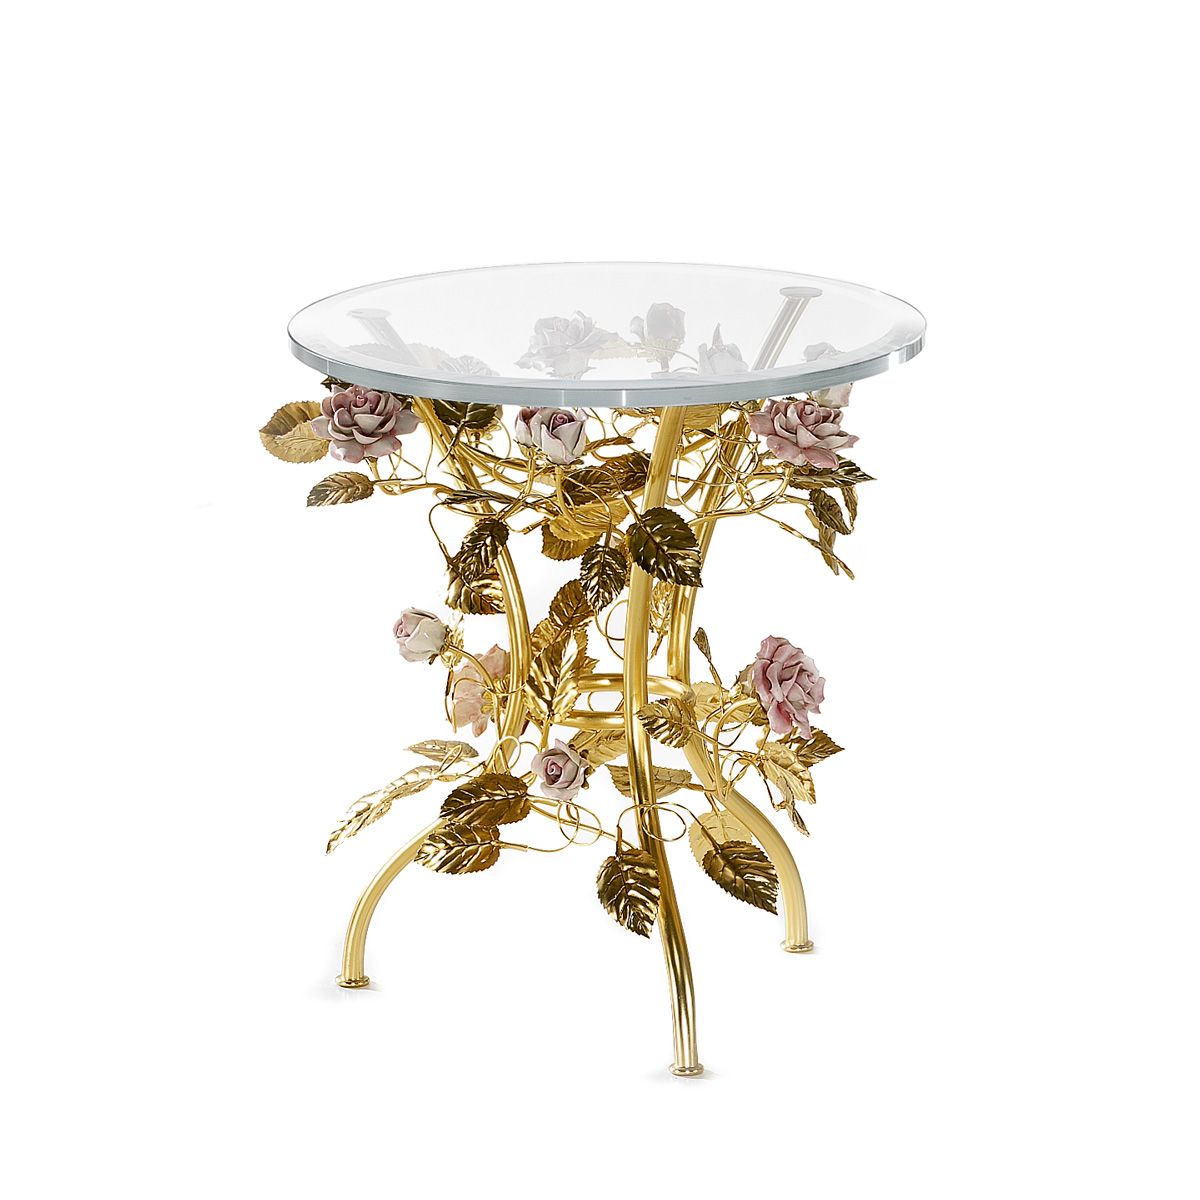 Maire-Antoinette Small Coffee Table - Gold & Pink